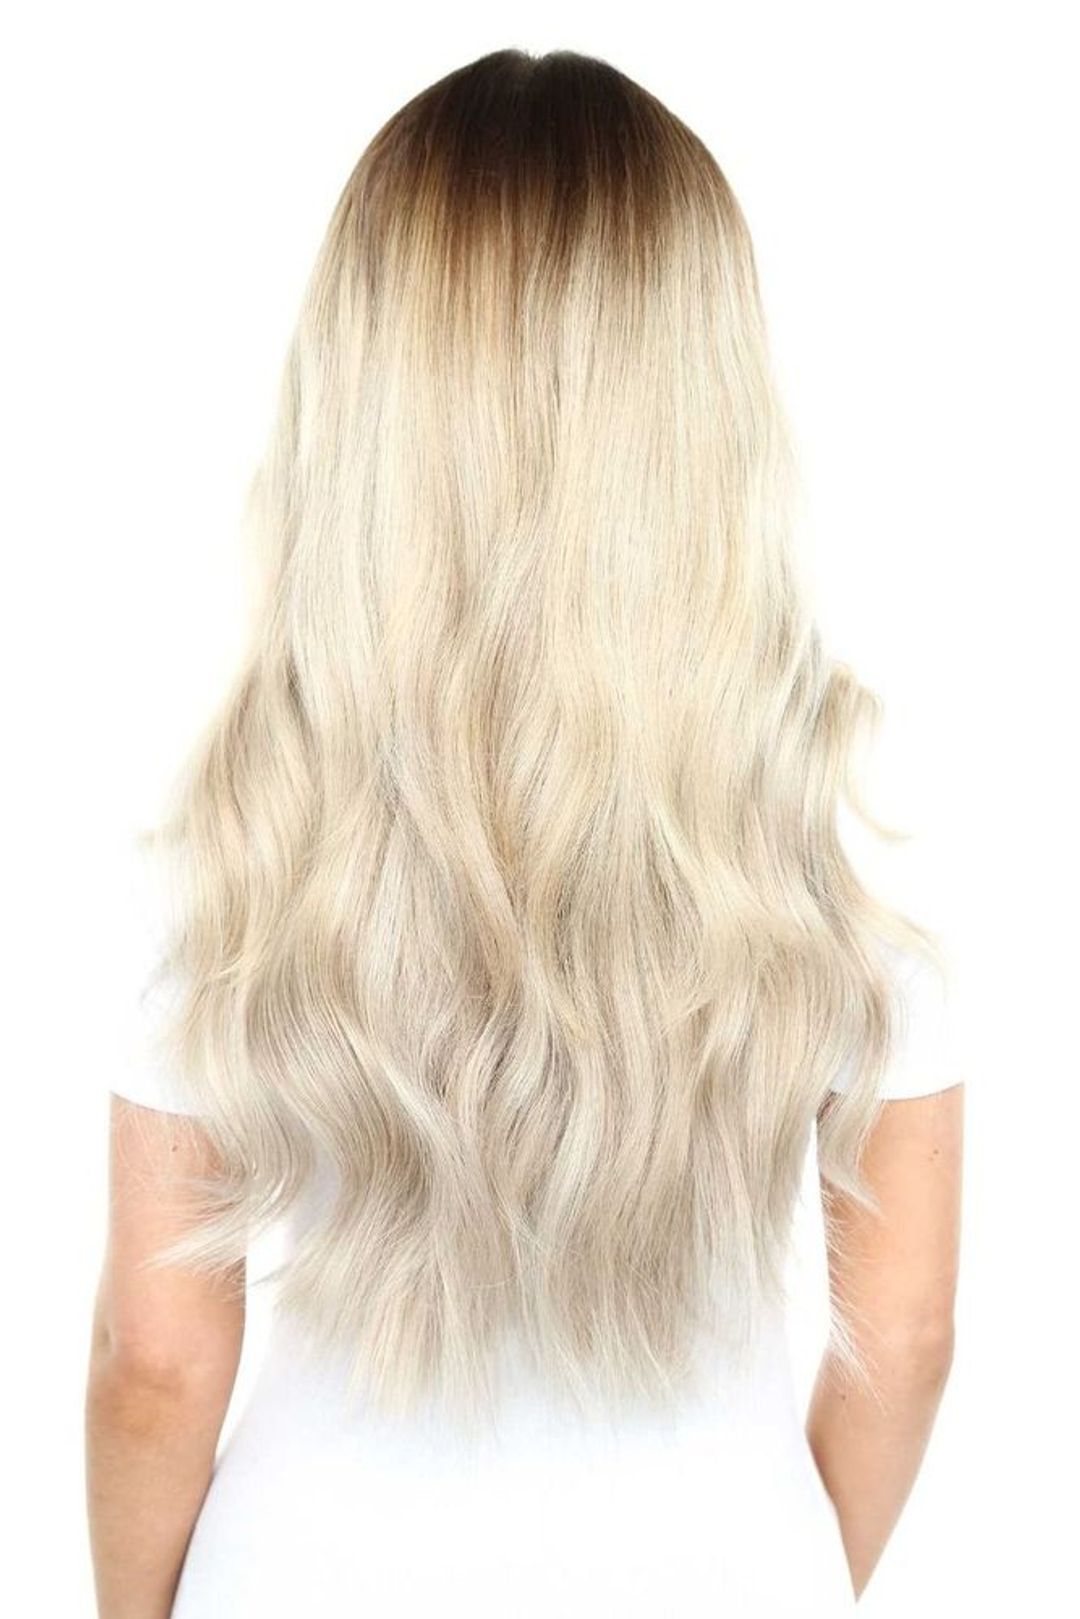 Beauty Works Gold Double Weft Extensions - Barley Blonde,22"